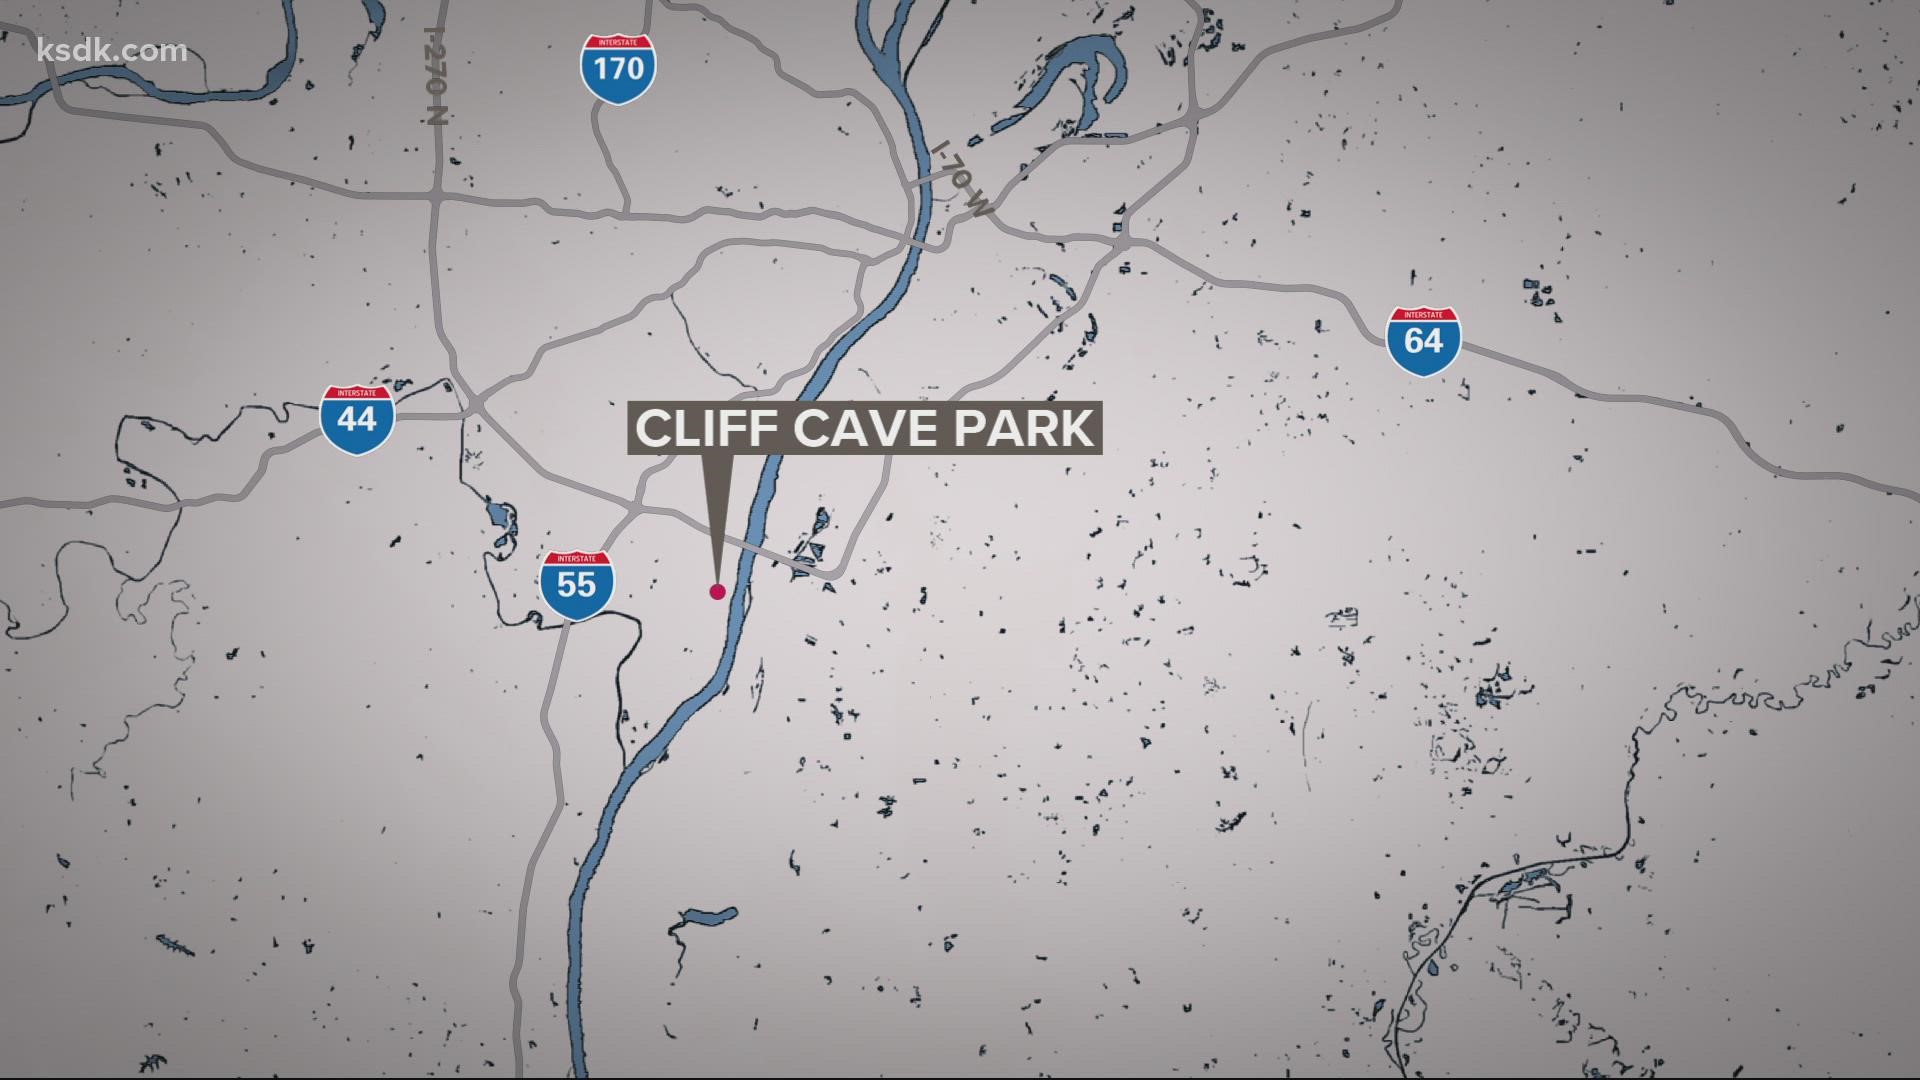 Emergency crews are searching for a body in the Mississippi River near Cliff Cave Park.